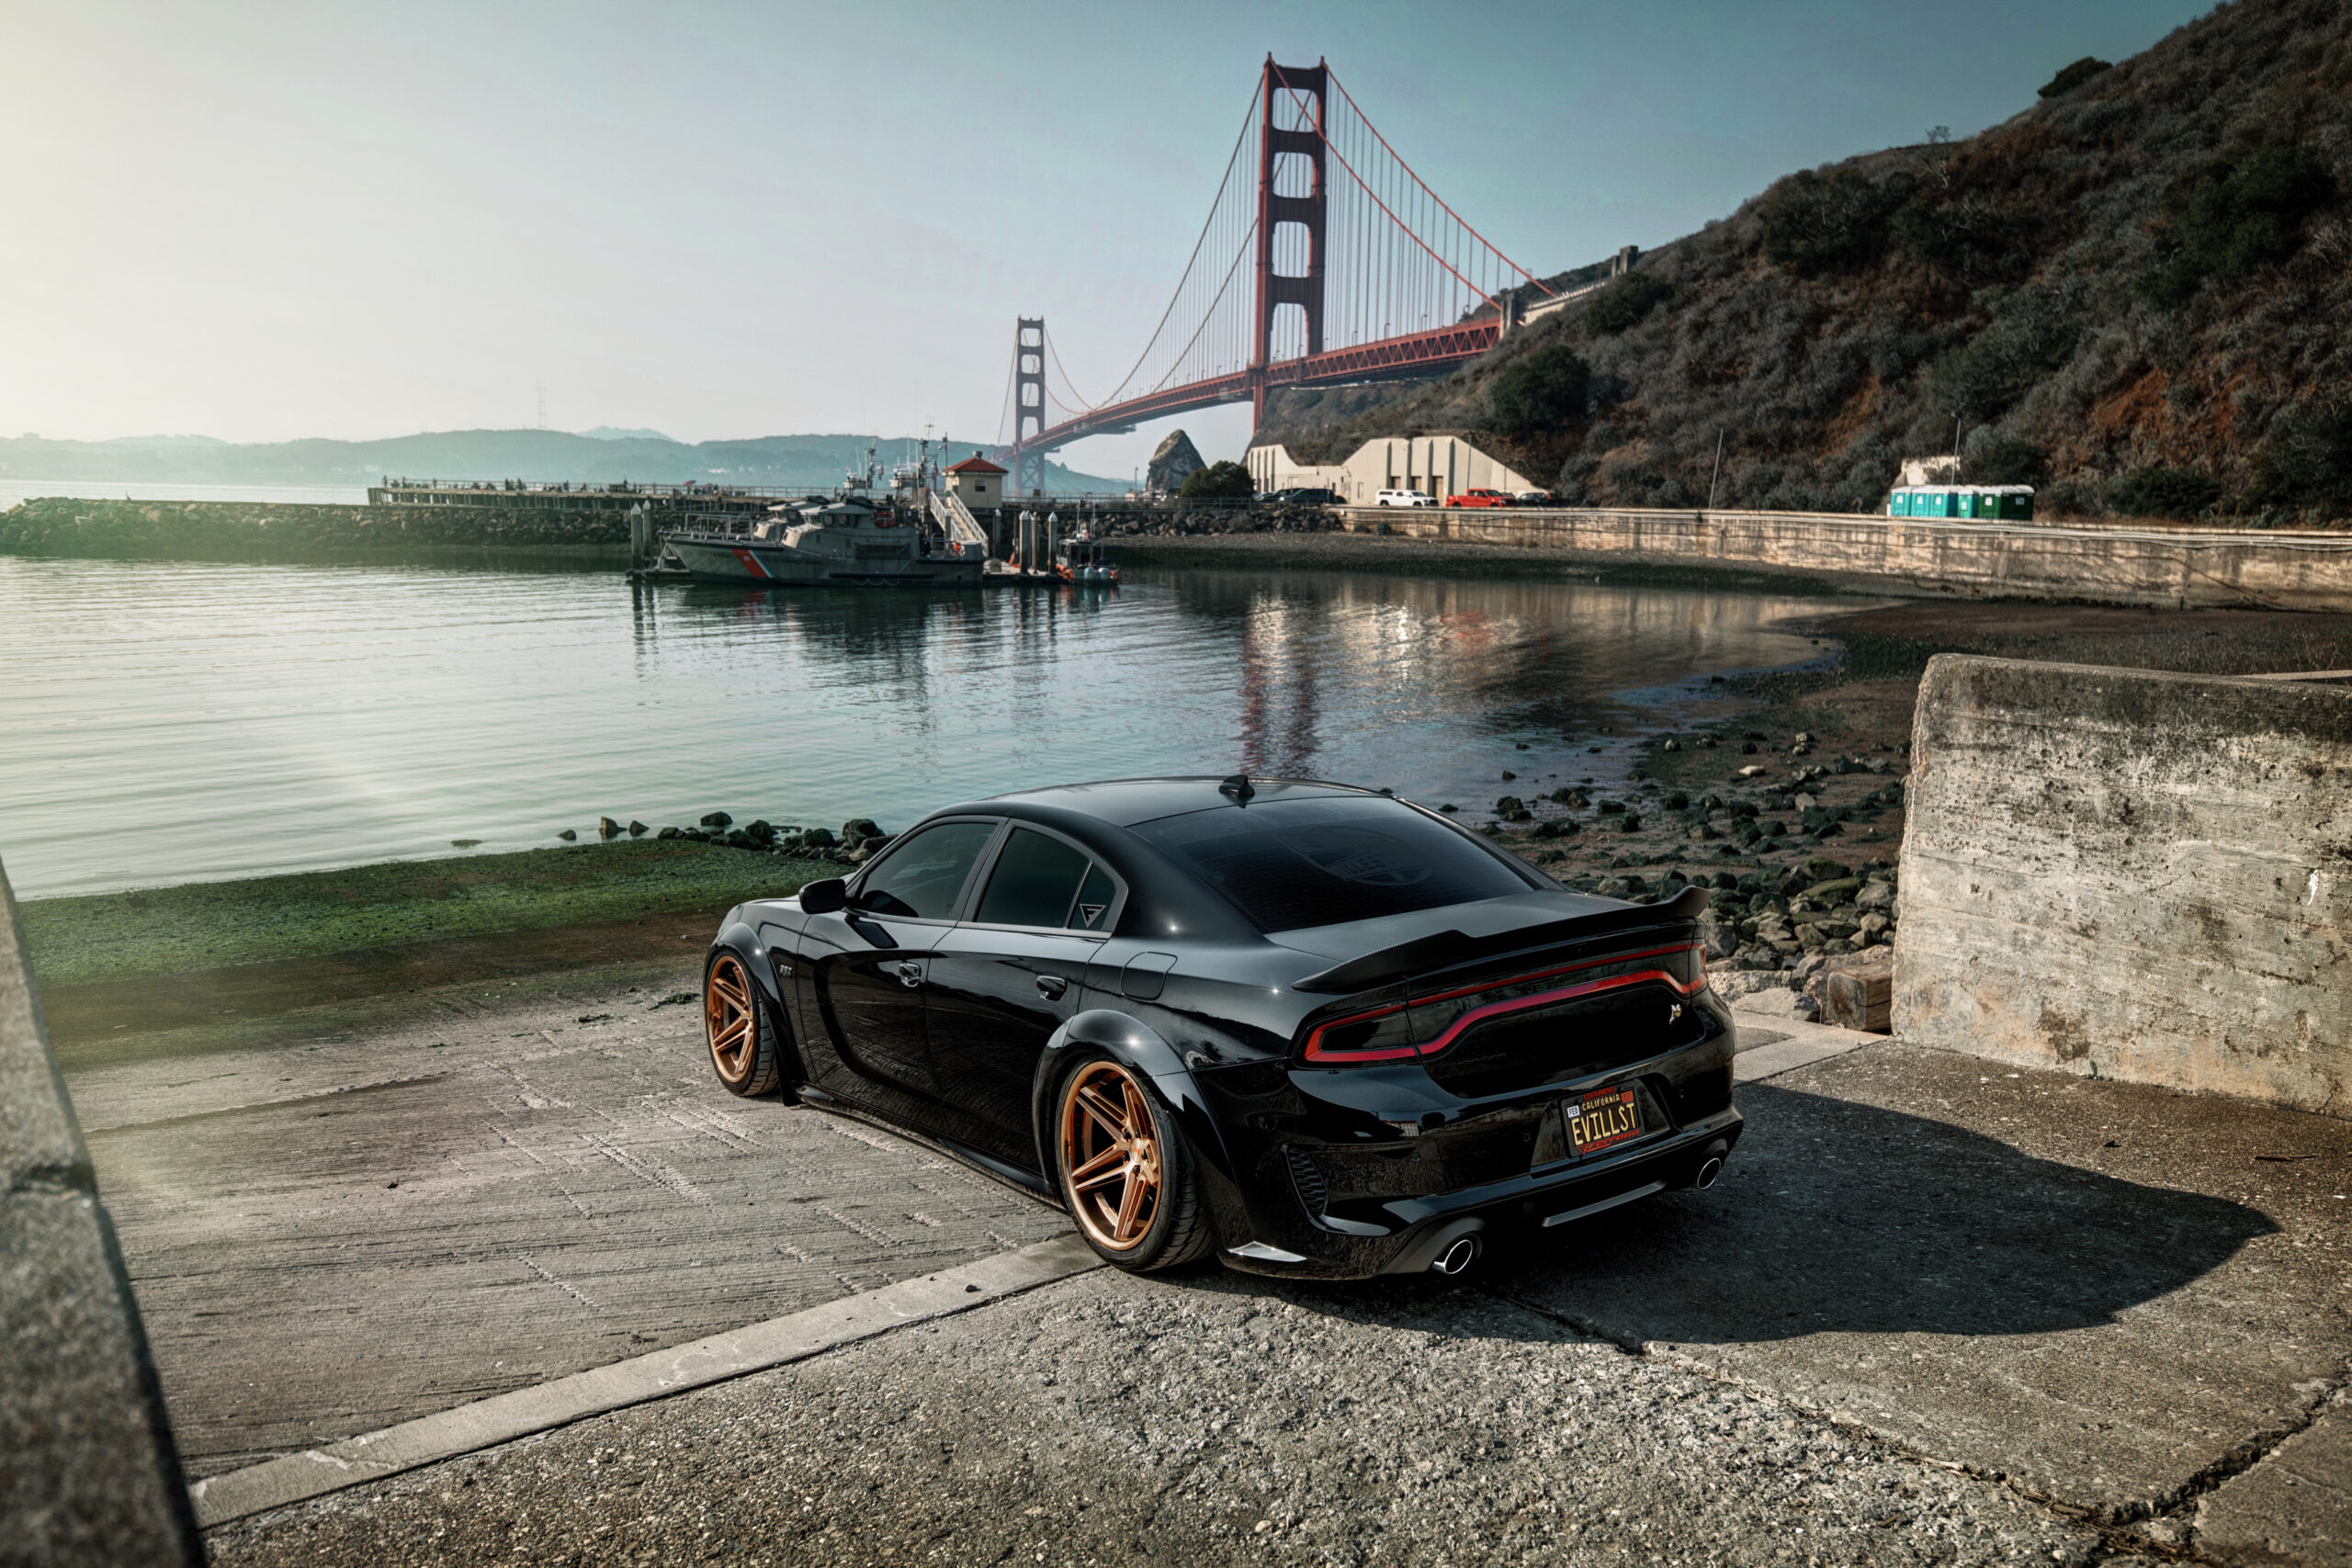 2020 Dodge Charger Widebody Scatpack - CM1 BCP-6